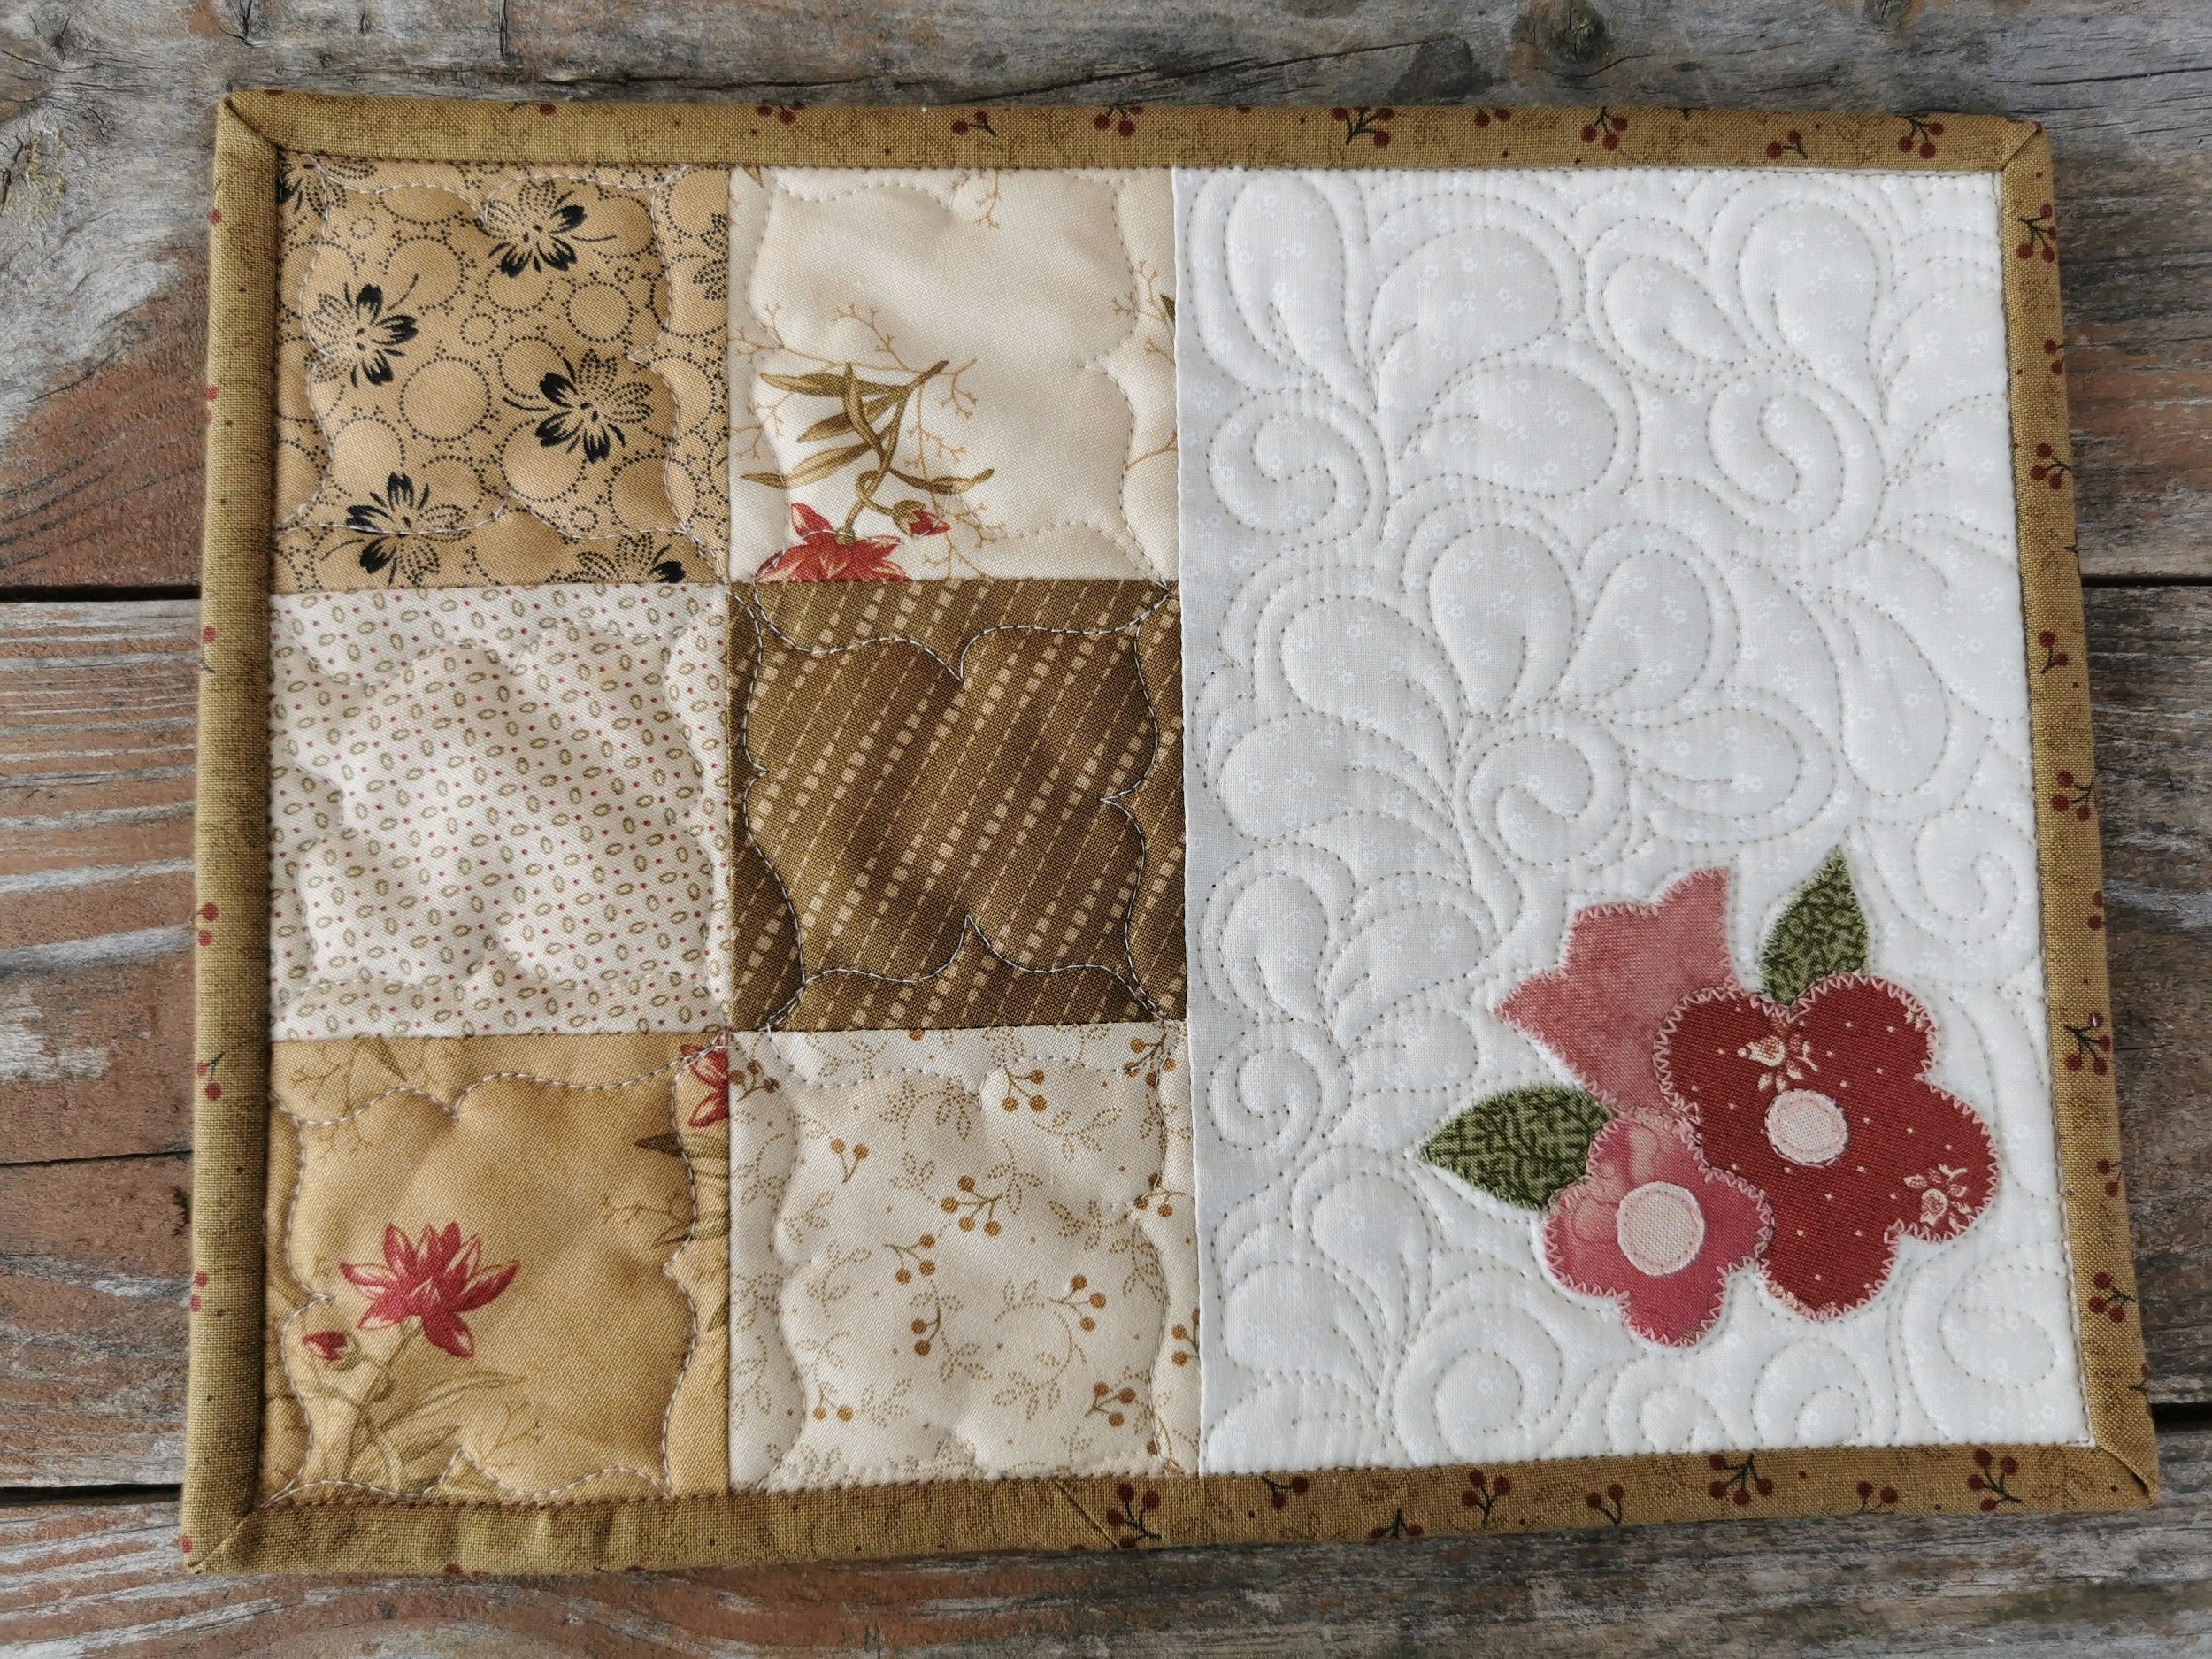 The flower mug rug is shown in a close up view to see the  applique flowers and custom quilting